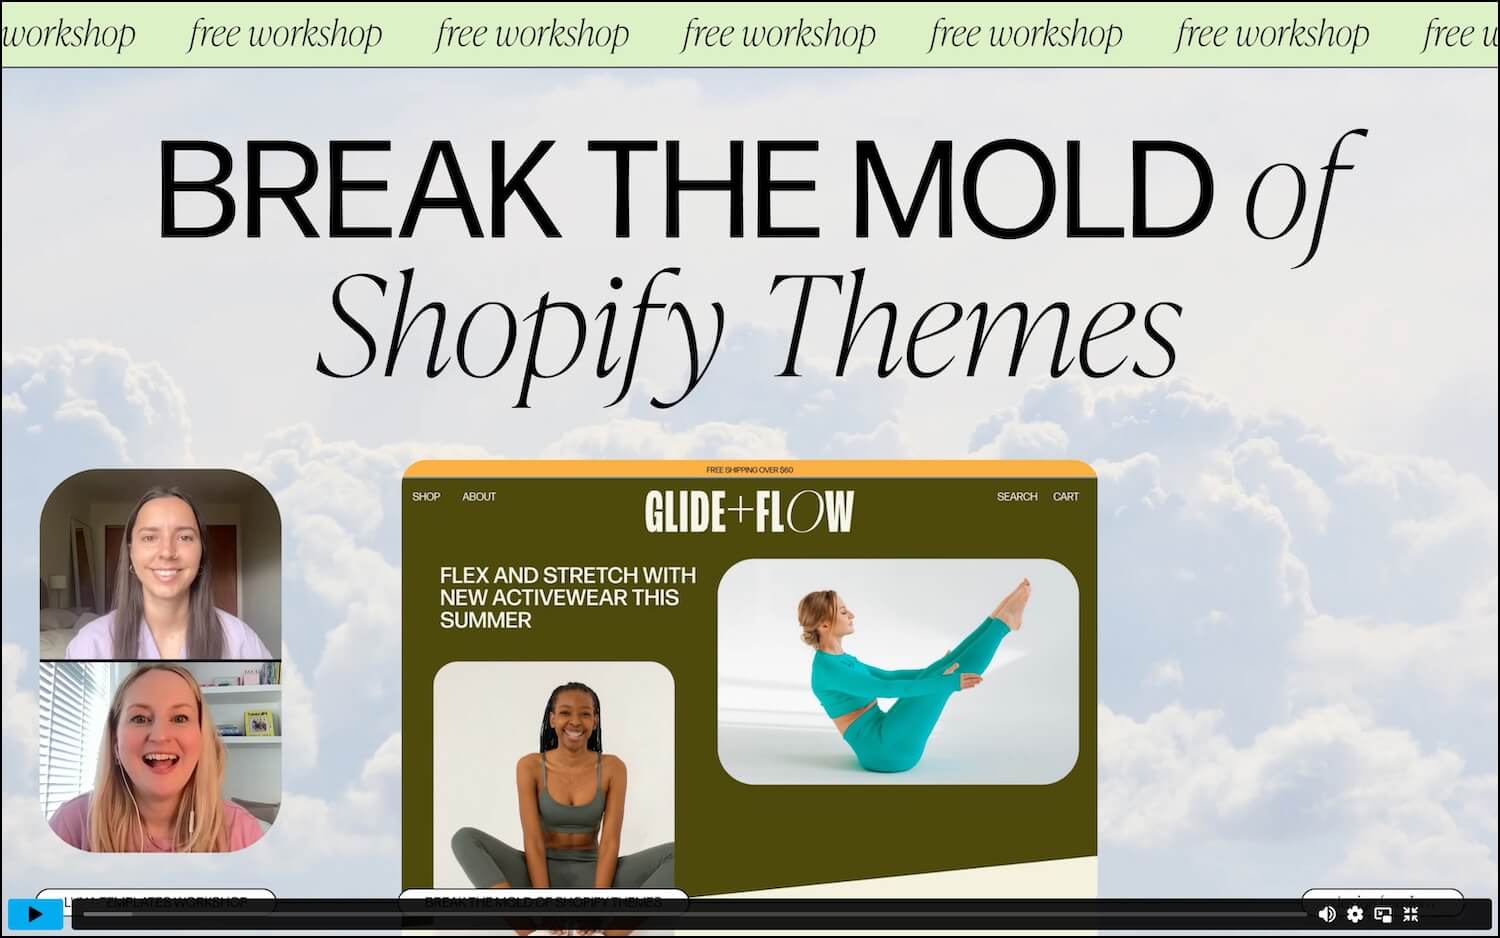 Break the Mold of Shopify Themes video cover image